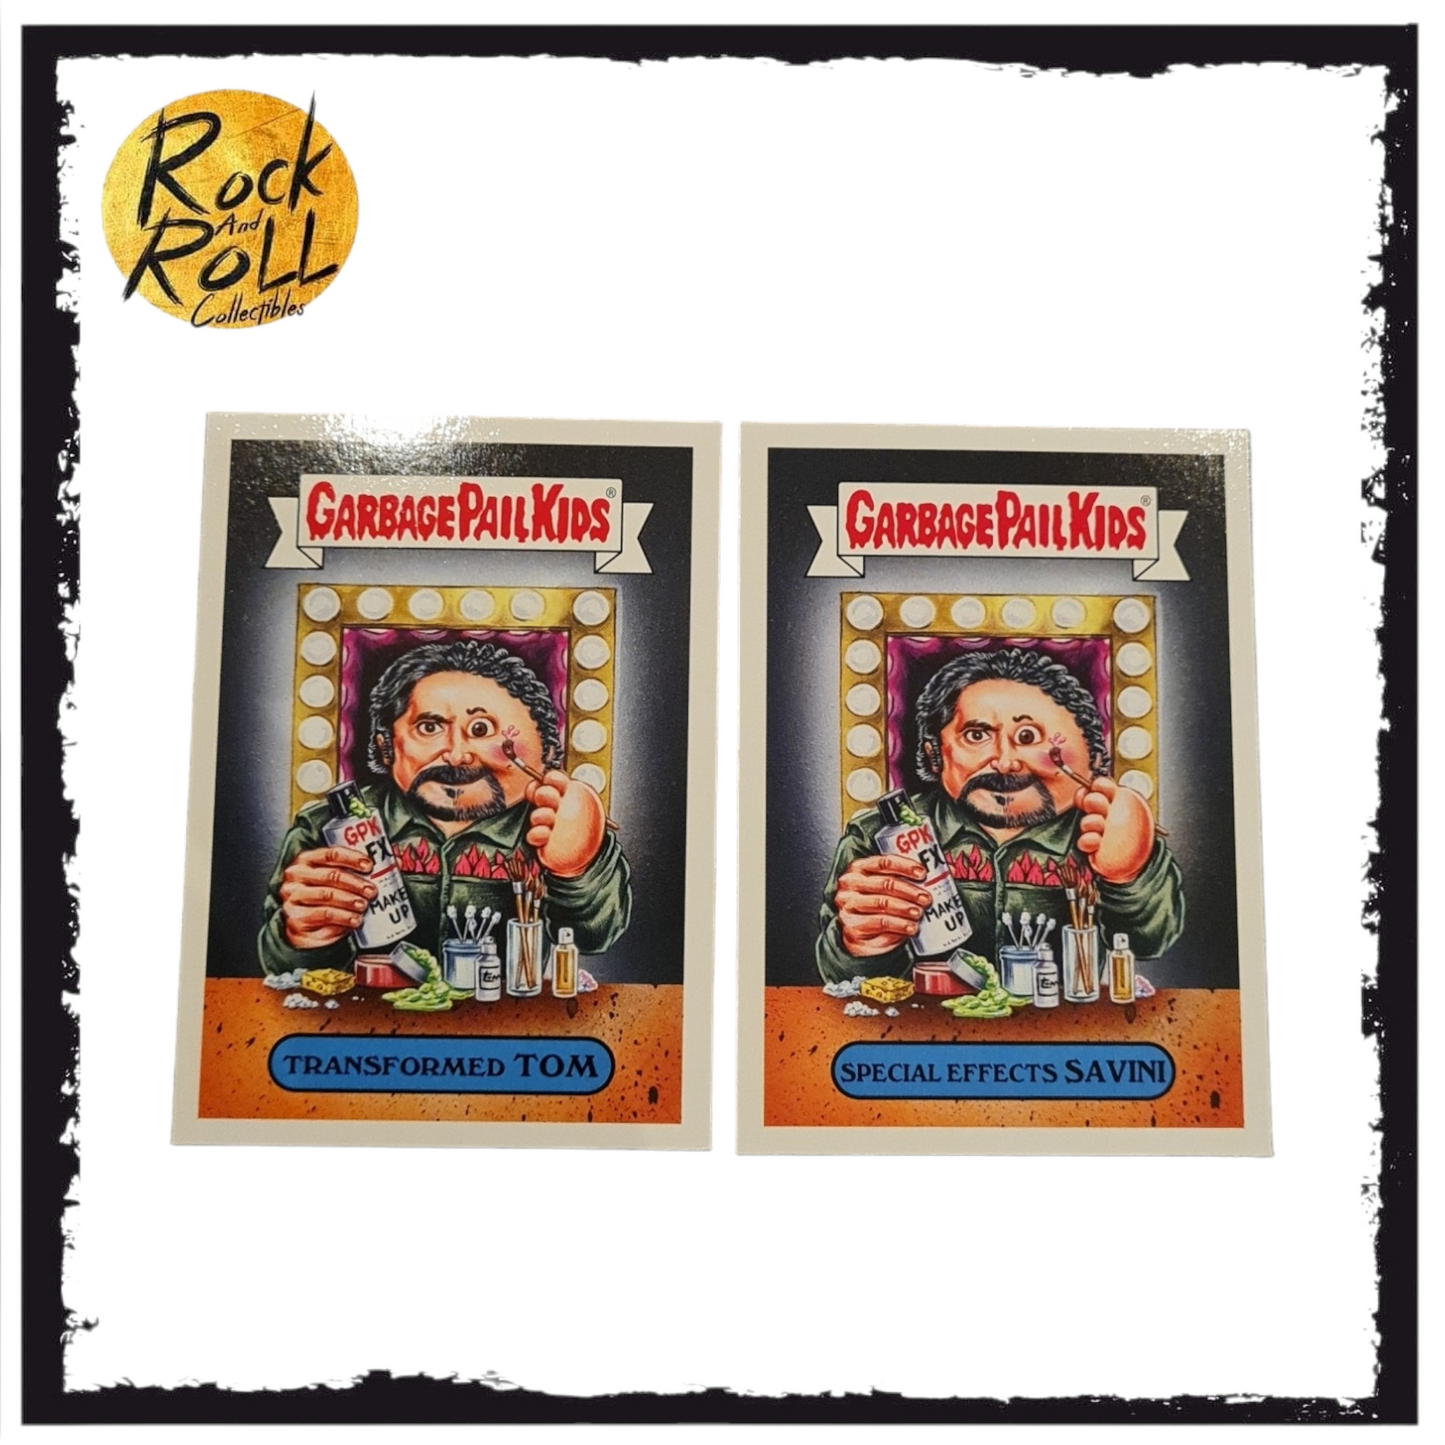 Garbage Pail KIds 2019 Topps - Transformed Tom & Special Effects Savini Horror Personality Sticker 14a / 14b of 15